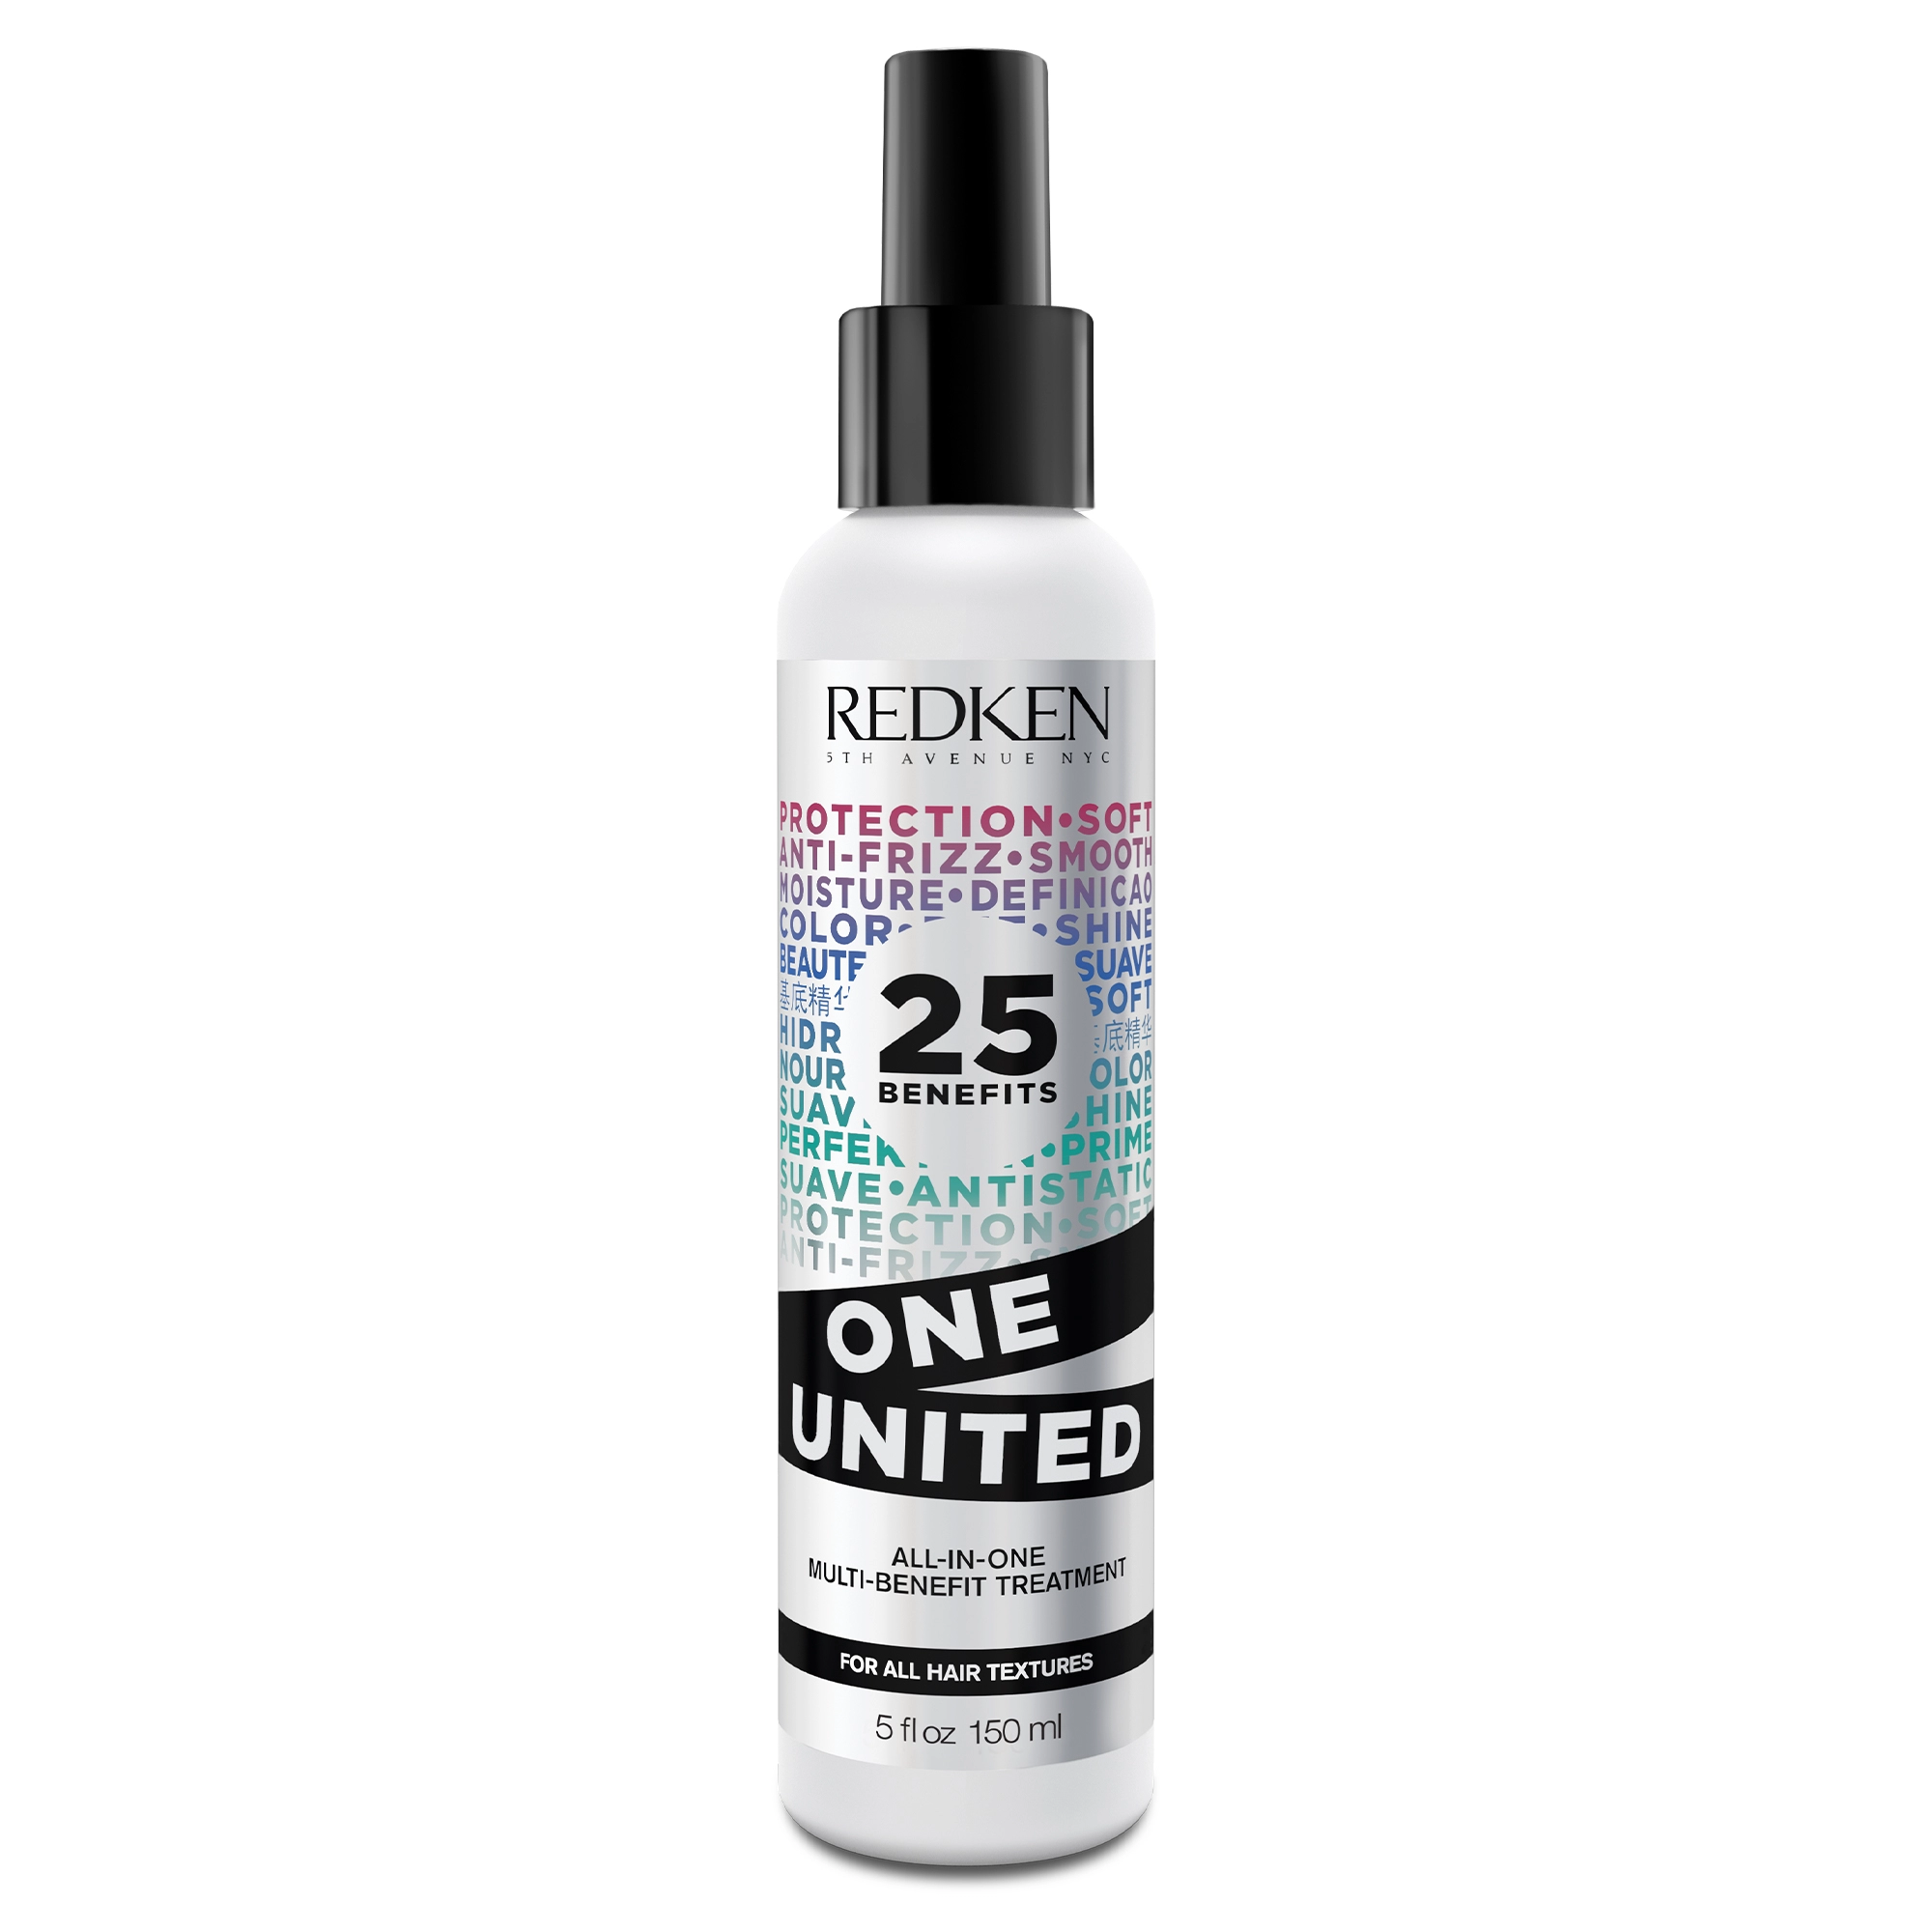 Redken-2020-One-United-Product-Shot-2000×2000